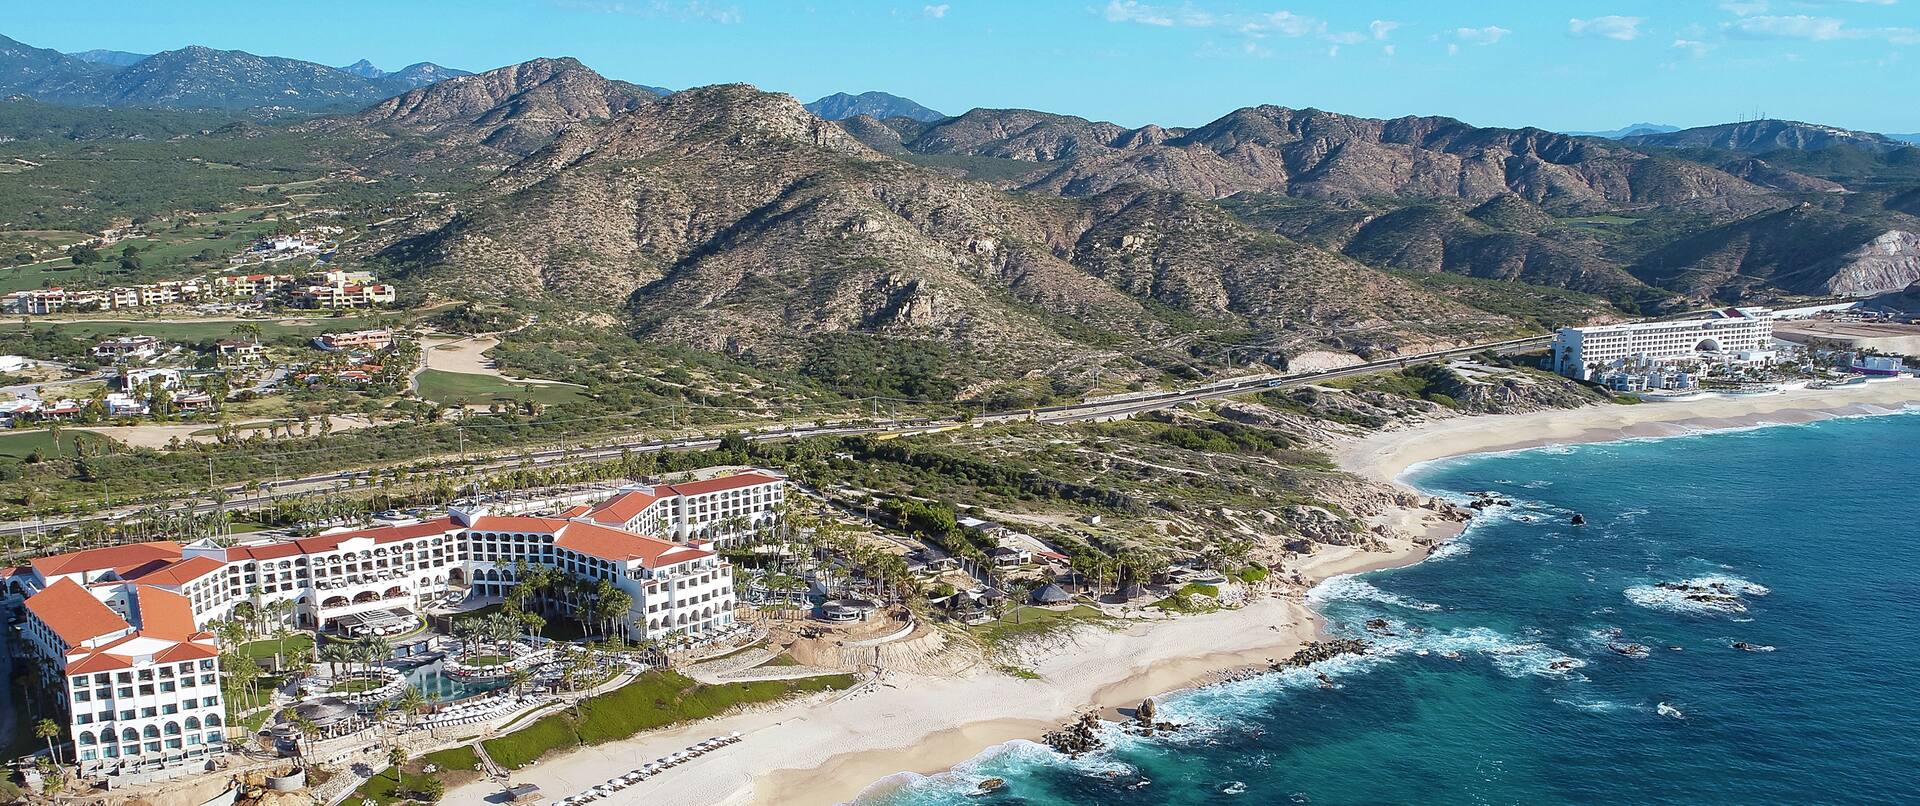 Aerial View of Hotel, Beach and Surrounding Mountains